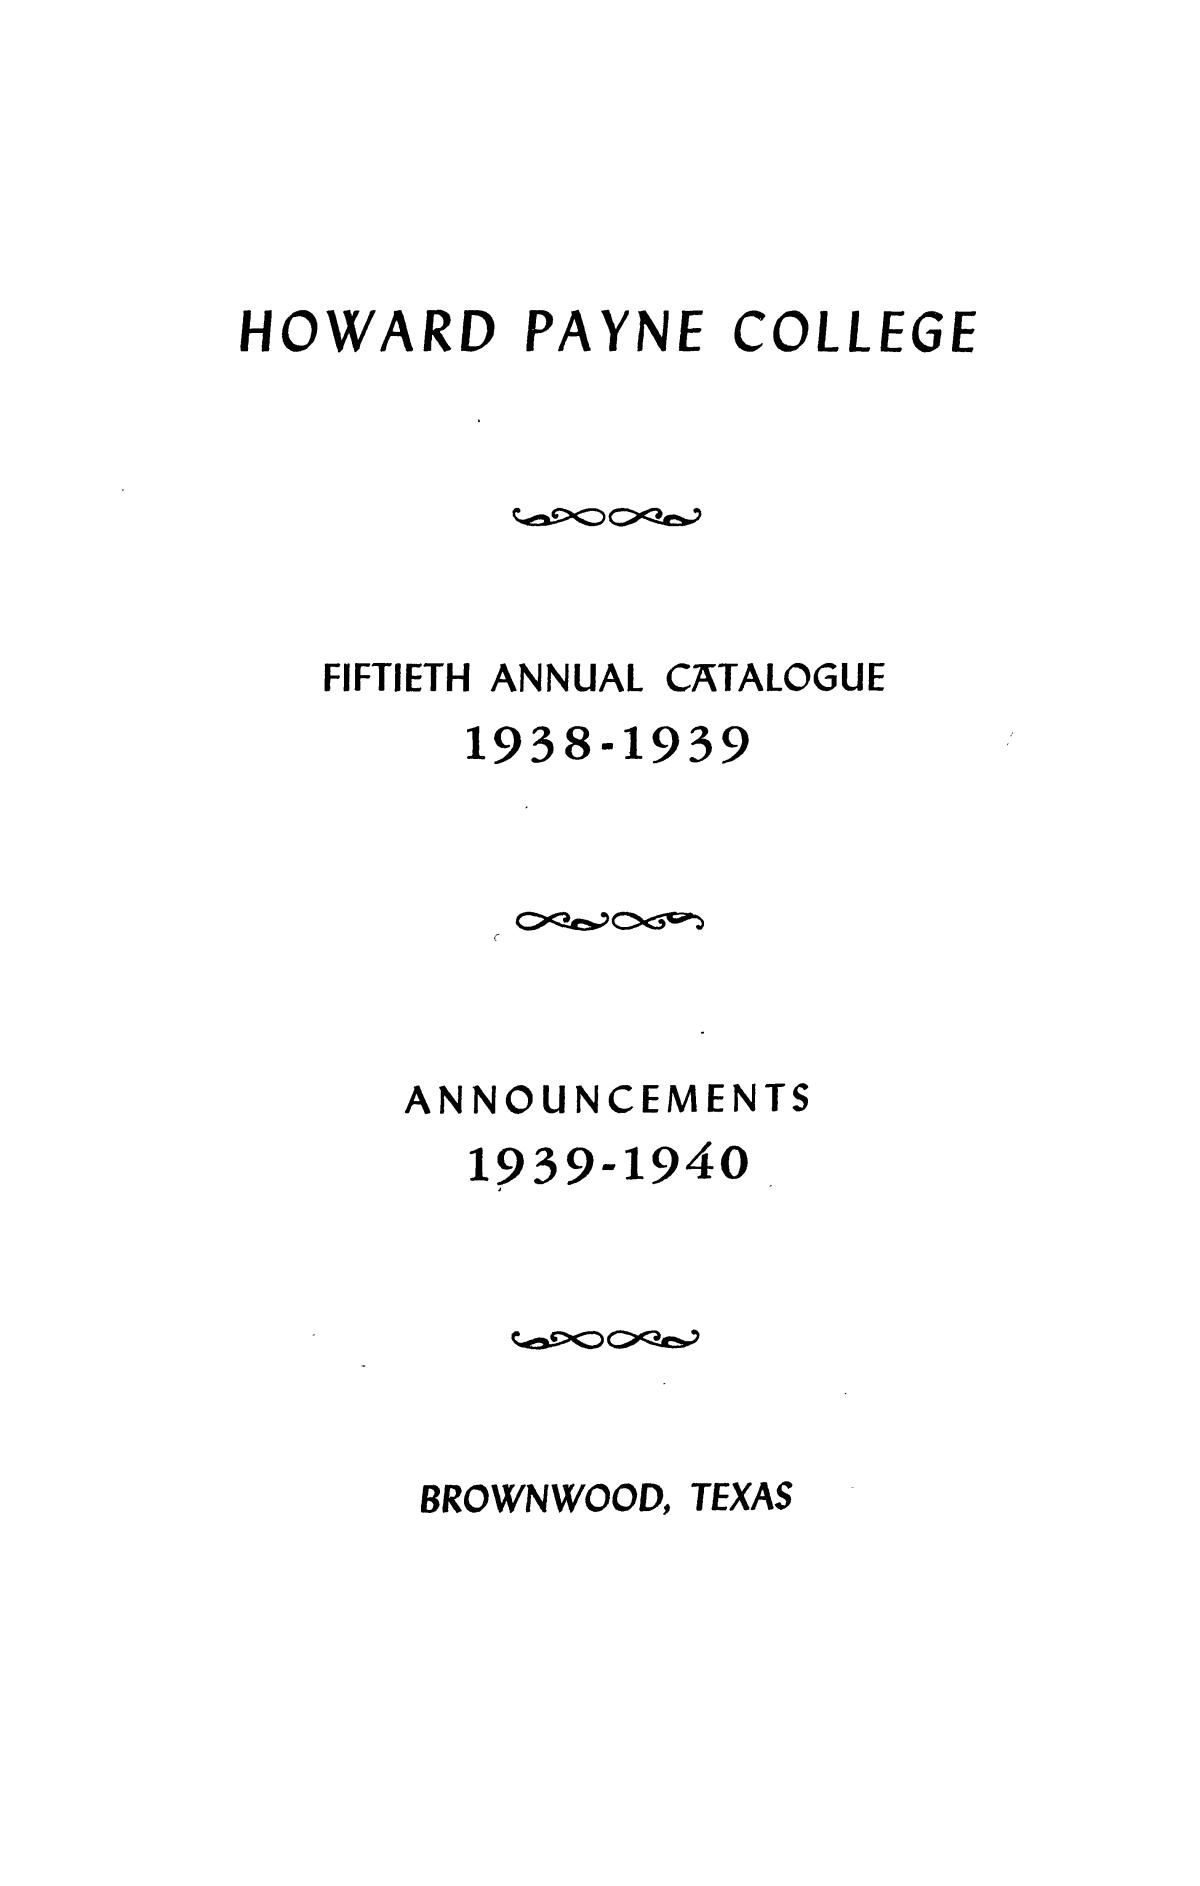 Catalogue of Howard Payne College, 1938-1939
                                                
                                                    1
                                                